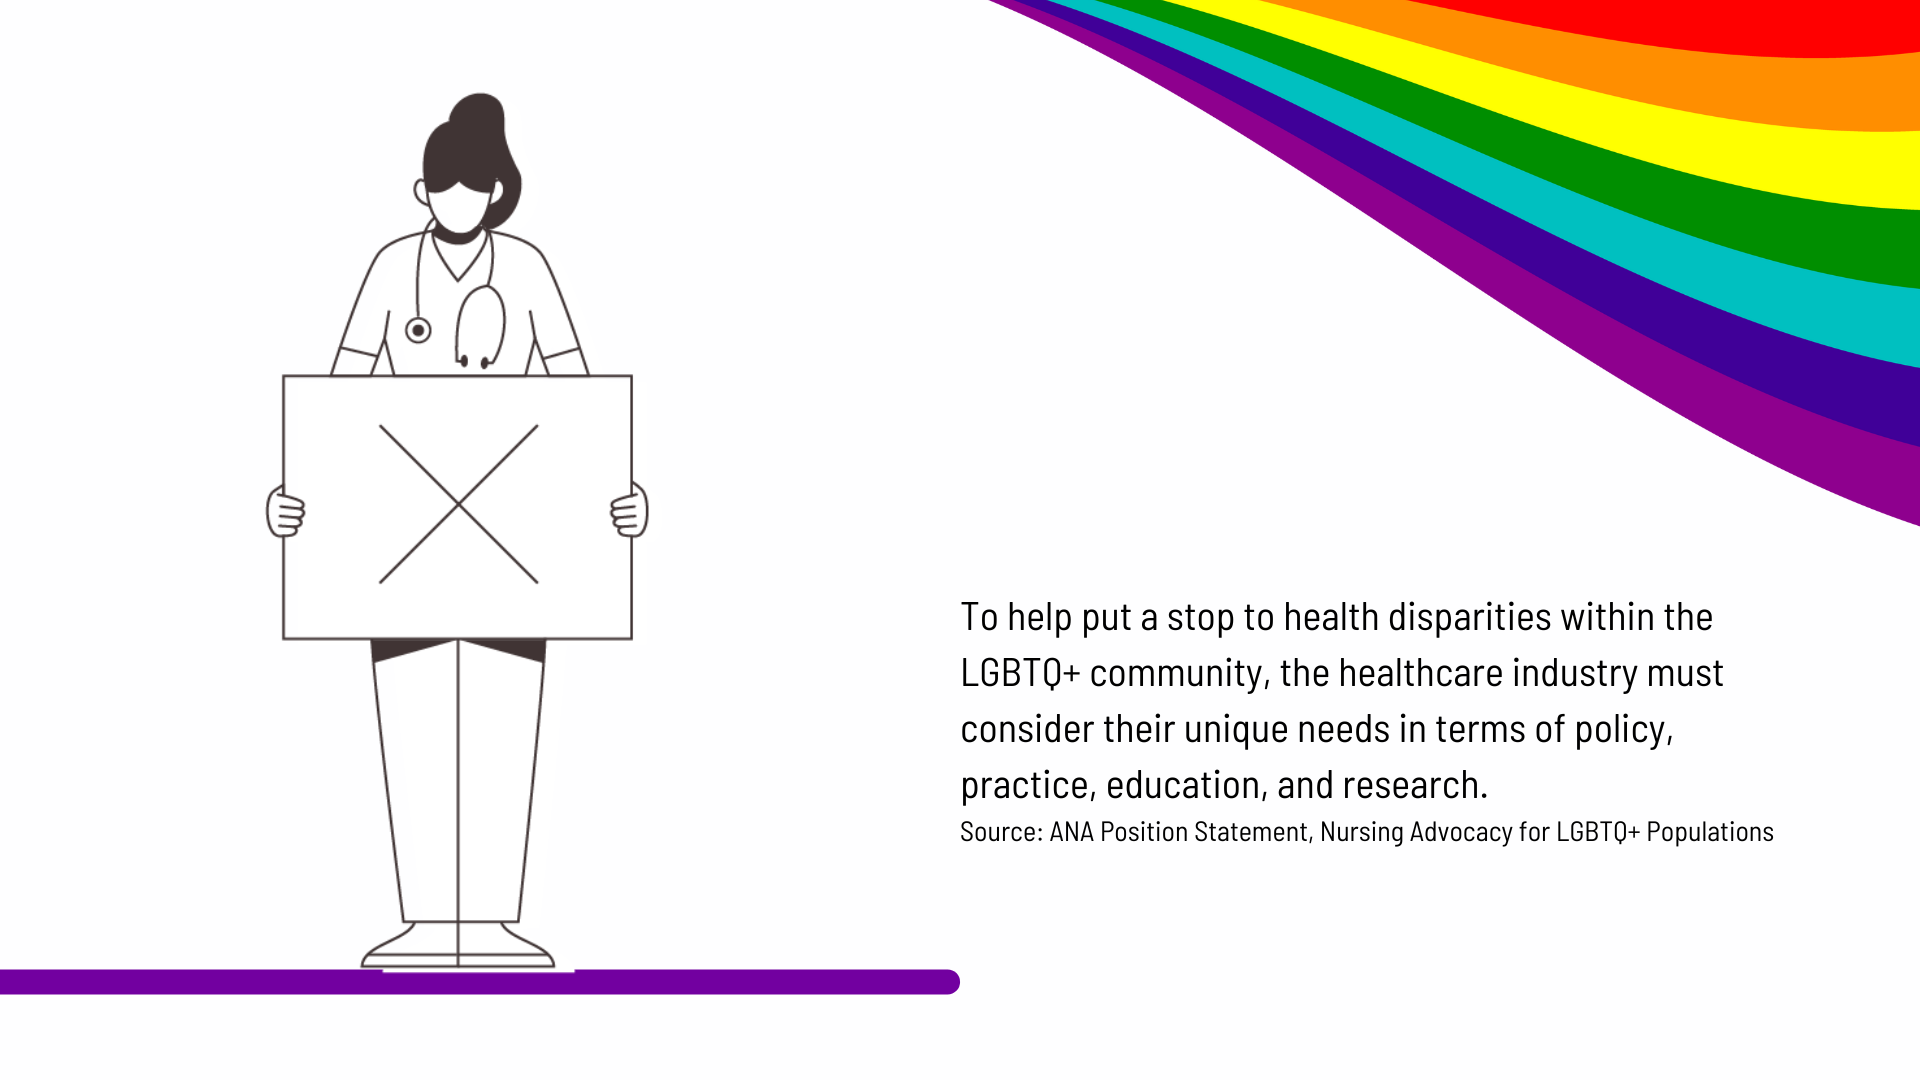 To help put a stop to the health disparities and discrimination this population often faces, the healthcare industry must consider the unique needs of LGBTQ+ patients in terms of policy, practice, education, and research. 